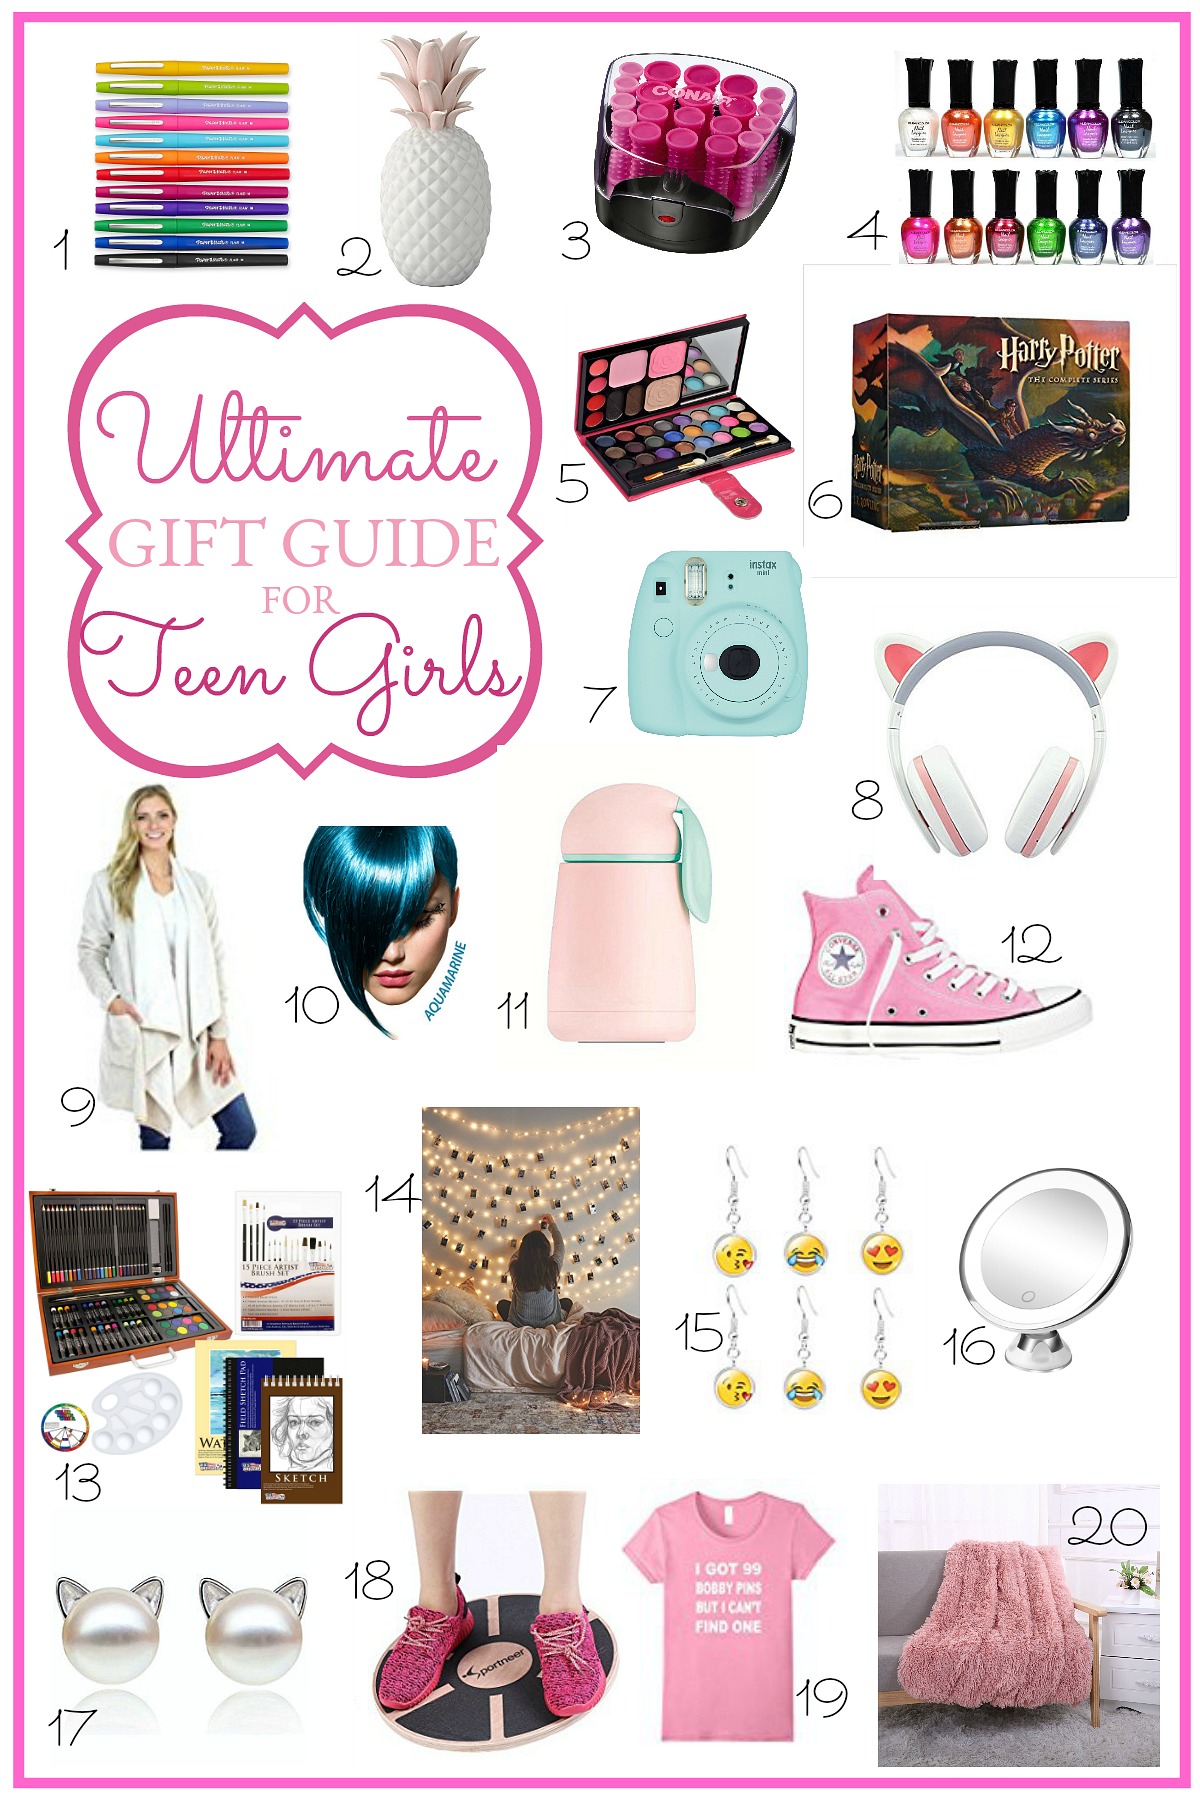 Ultimate Holiday Gift Guide for Teen girls chosen by 14 year old girls for Christmas or birthday presents. Here is their wish list!